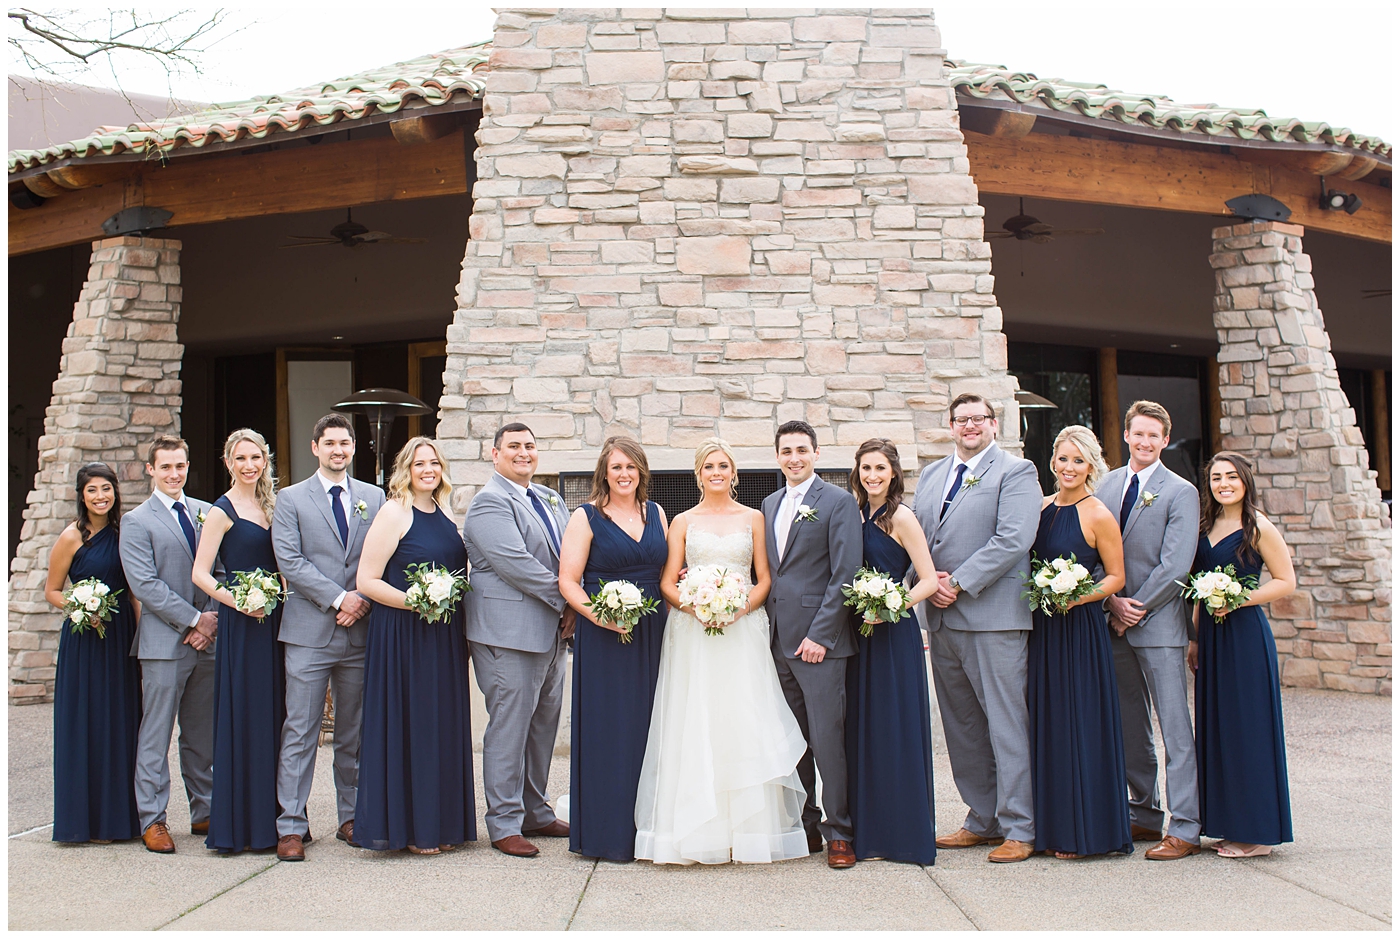 bridesmaids in assorted navy blue dresses with white rose and greenery flower bouquets with groom in gray suit with pink tie with groomsmen with navy ties on wedding day bridal party picture